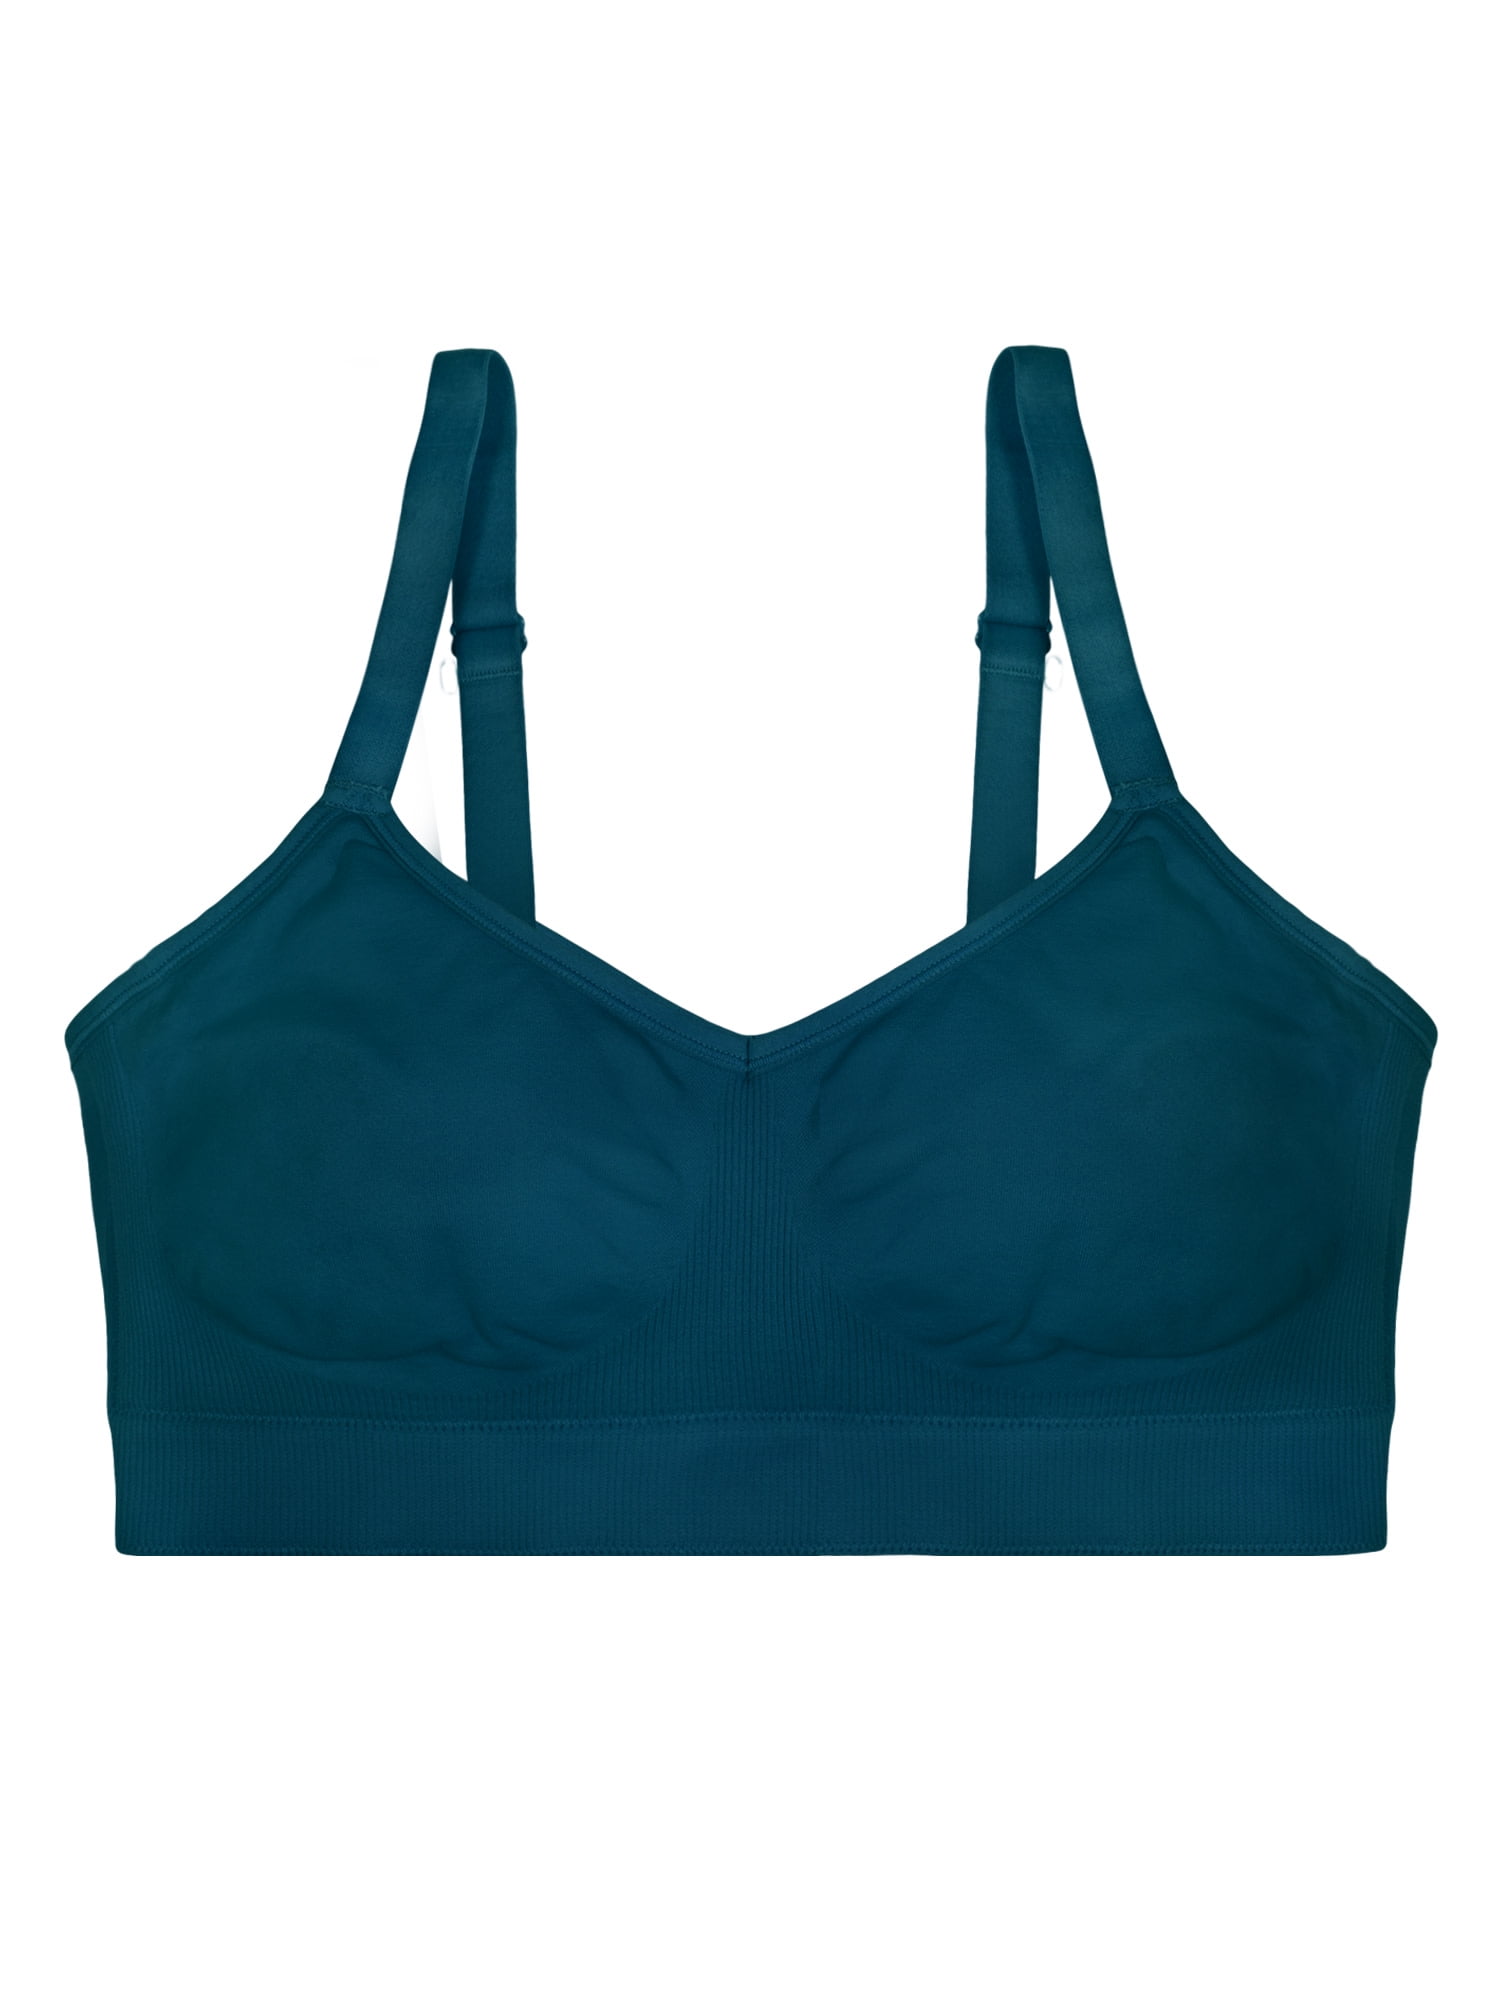 Buy BlissClub Absolute Invisible Bra, Seamless Bra, All Day Support, Removable Cups